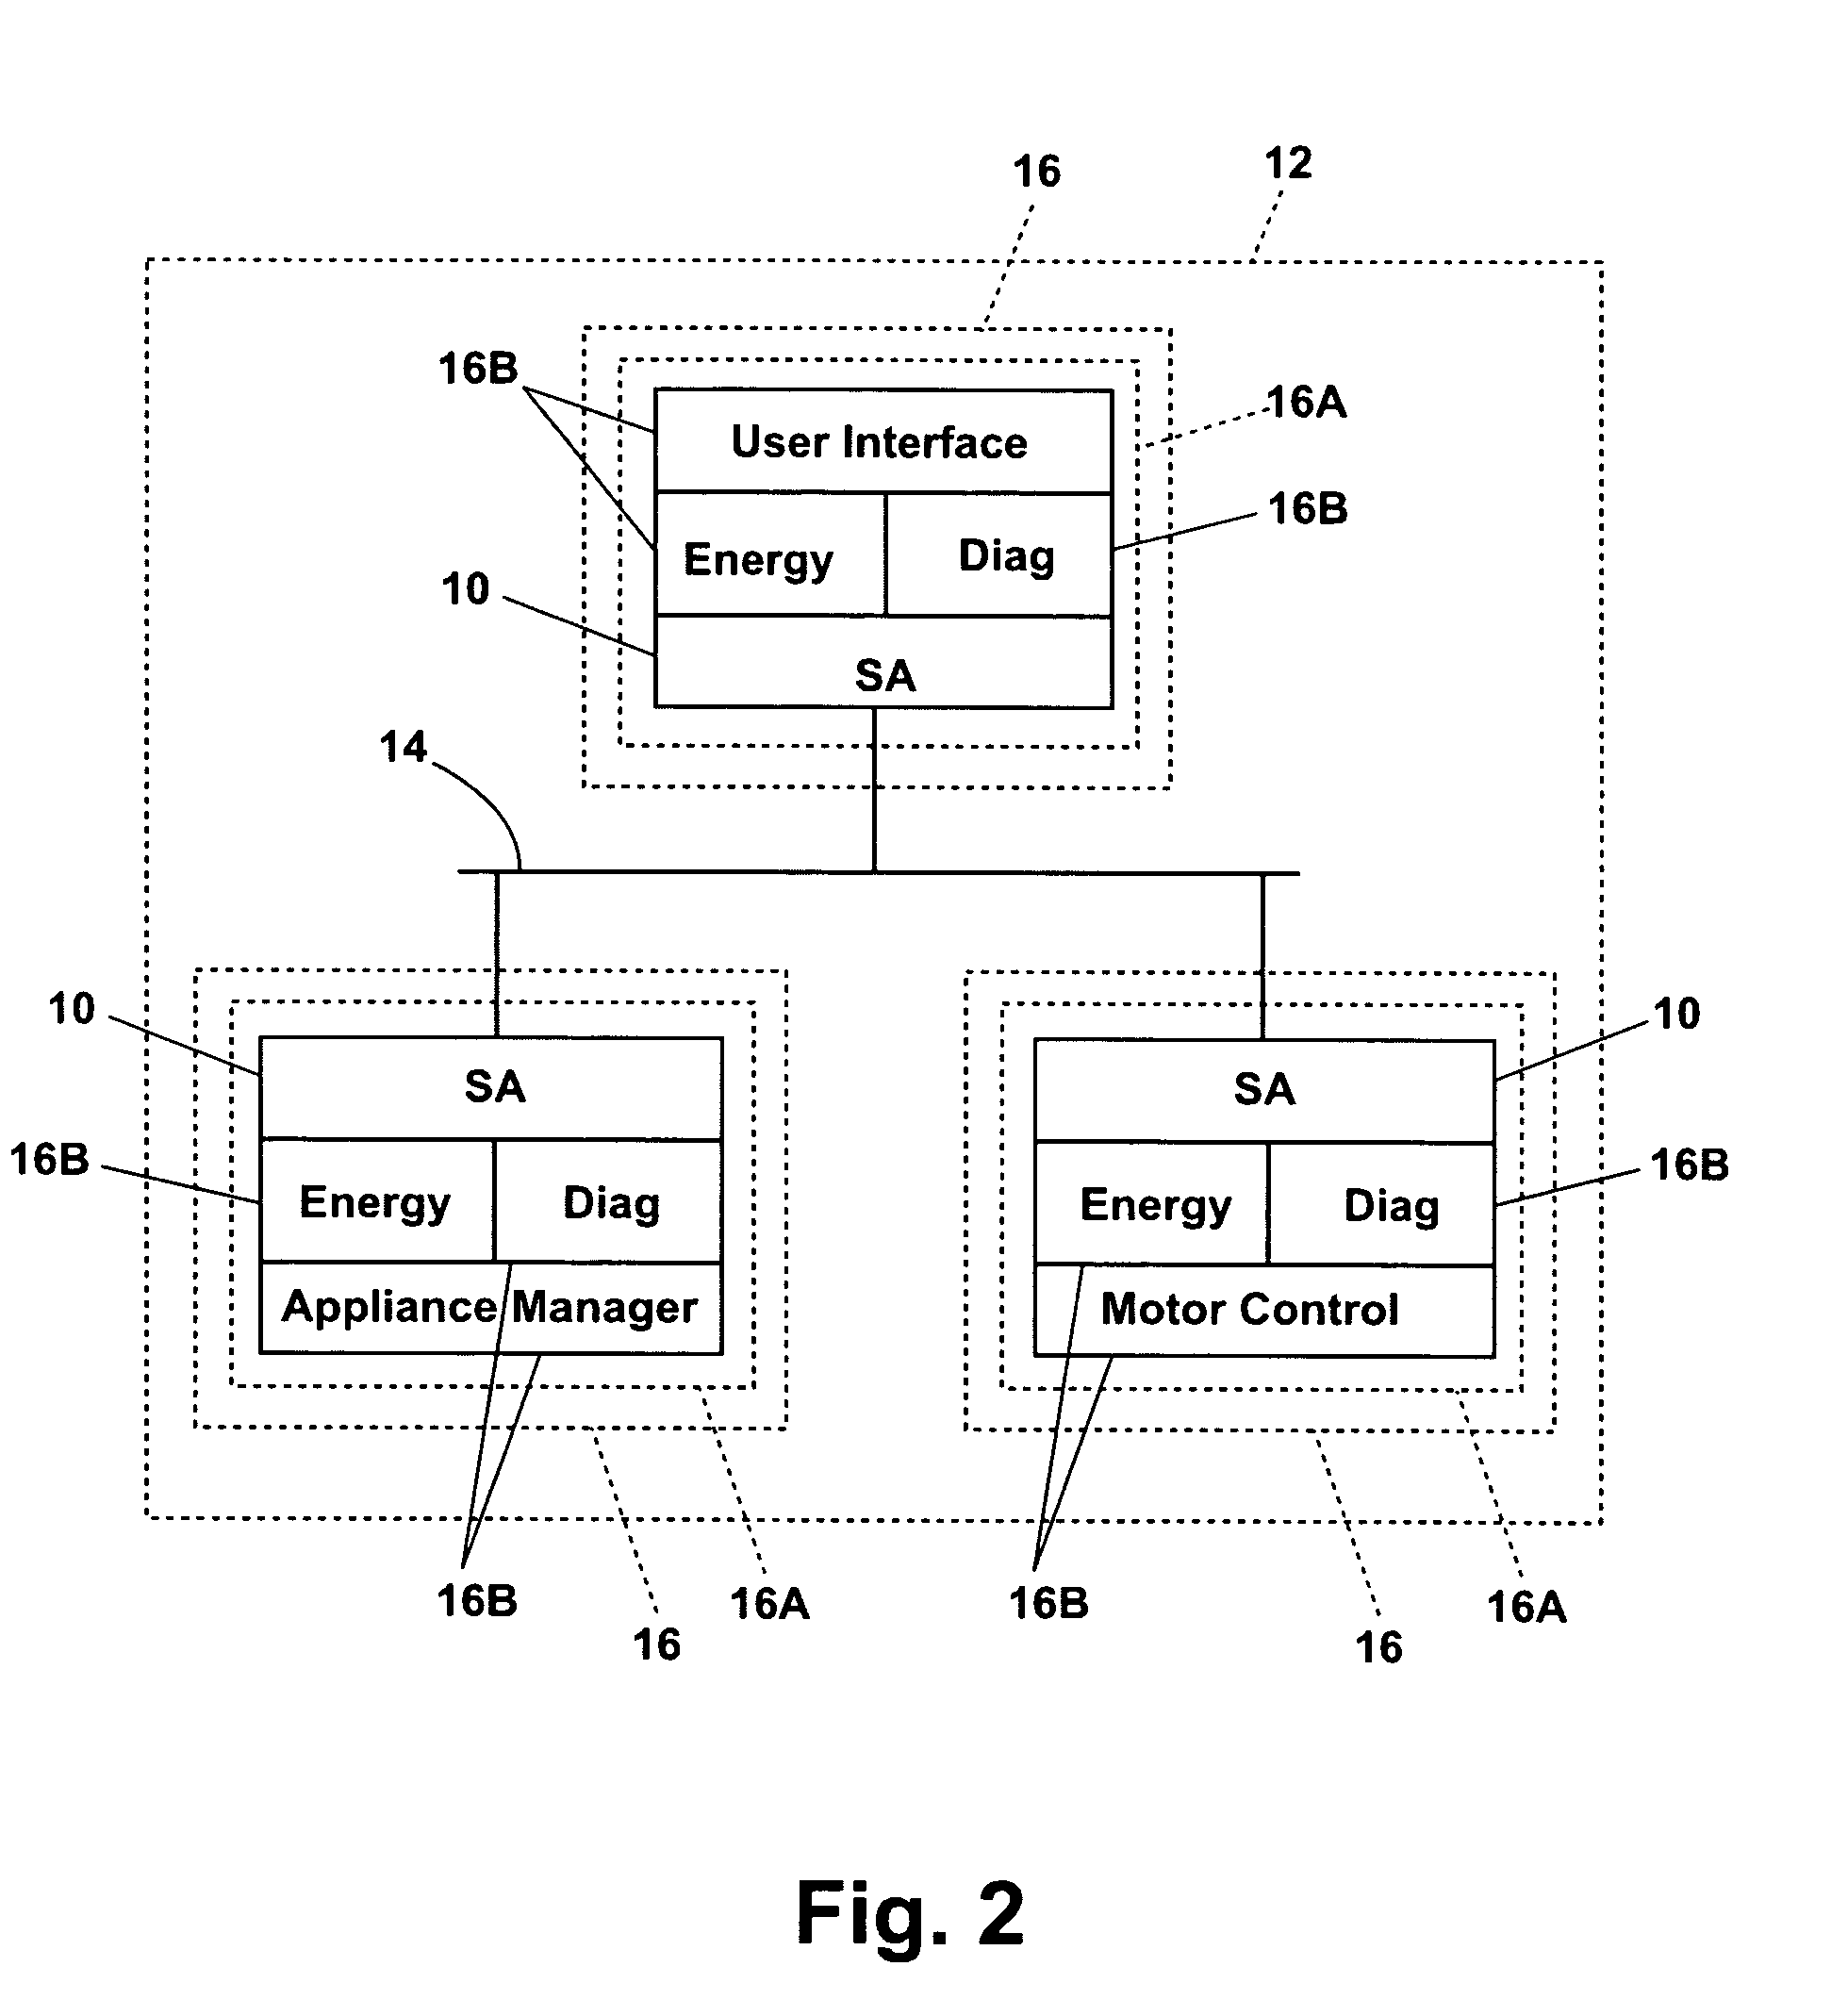 Distributed object-oriented appliance control system